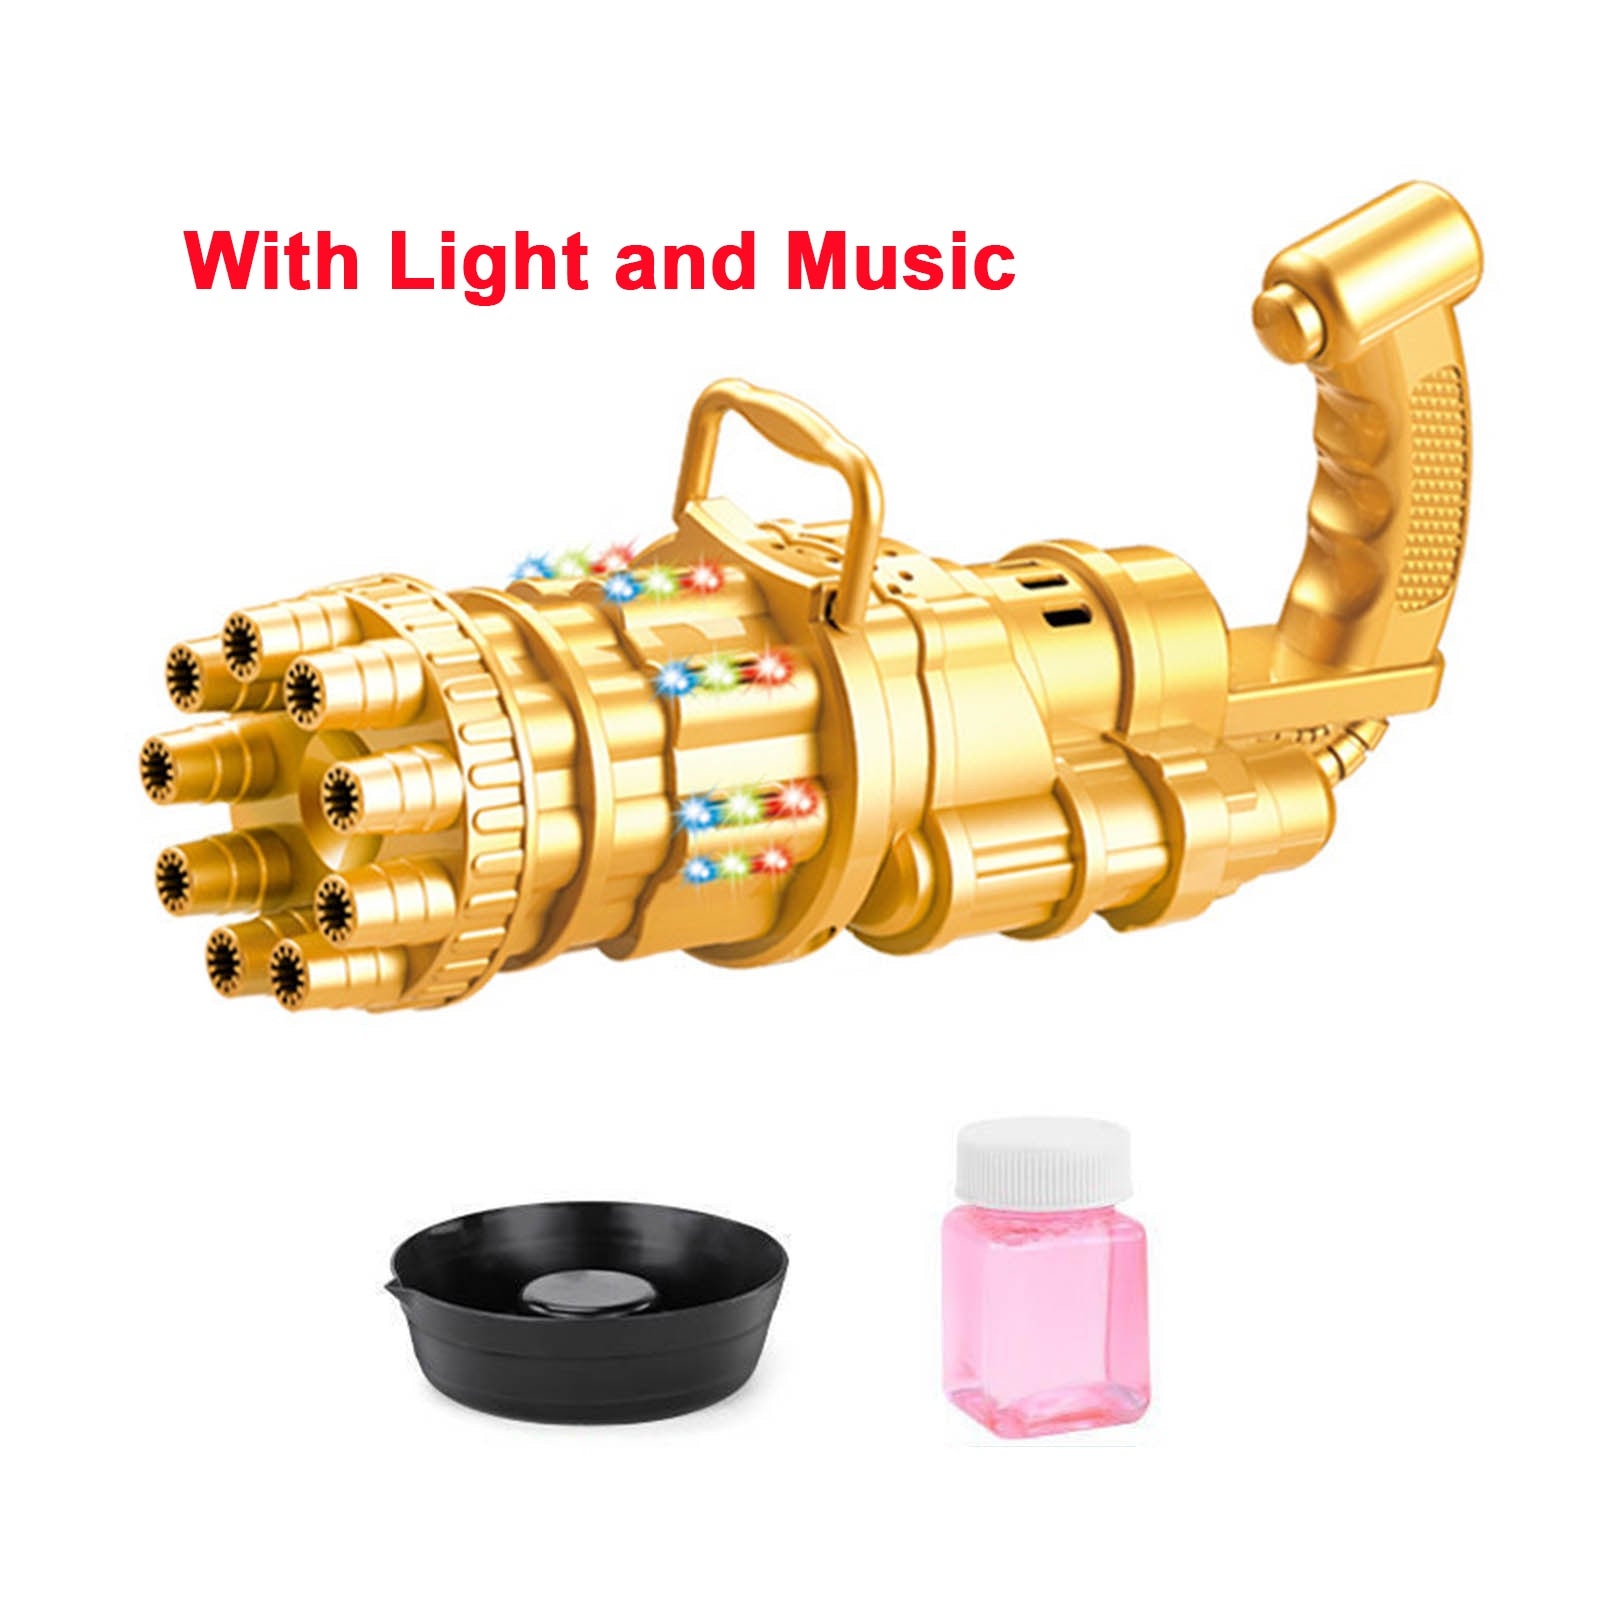 Electric Bubble Machine Toy Gun - Lights and music 13 Find Epic Store